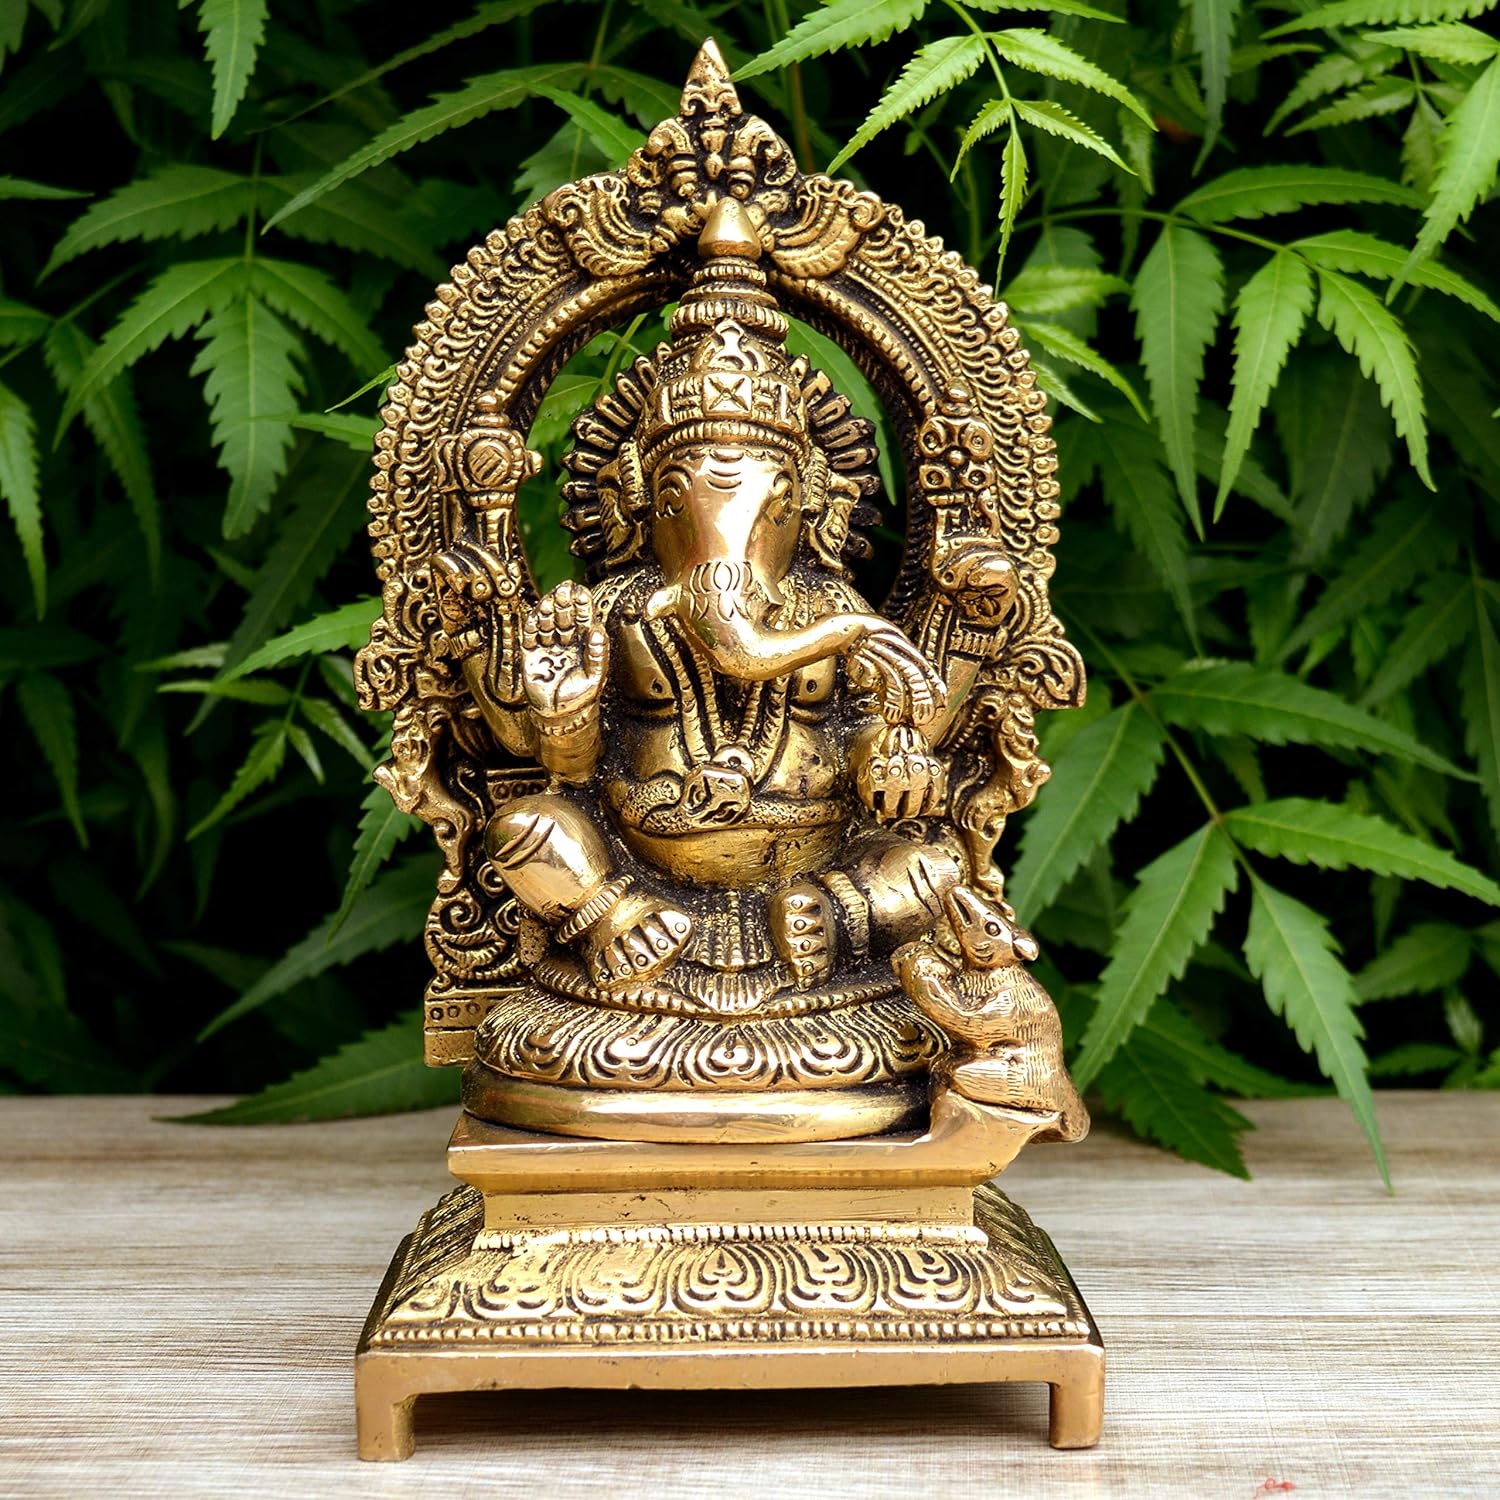 Aakrati Lord Ganesha Sitting Statue On A Throne Made of Brass - Best Religious Gift